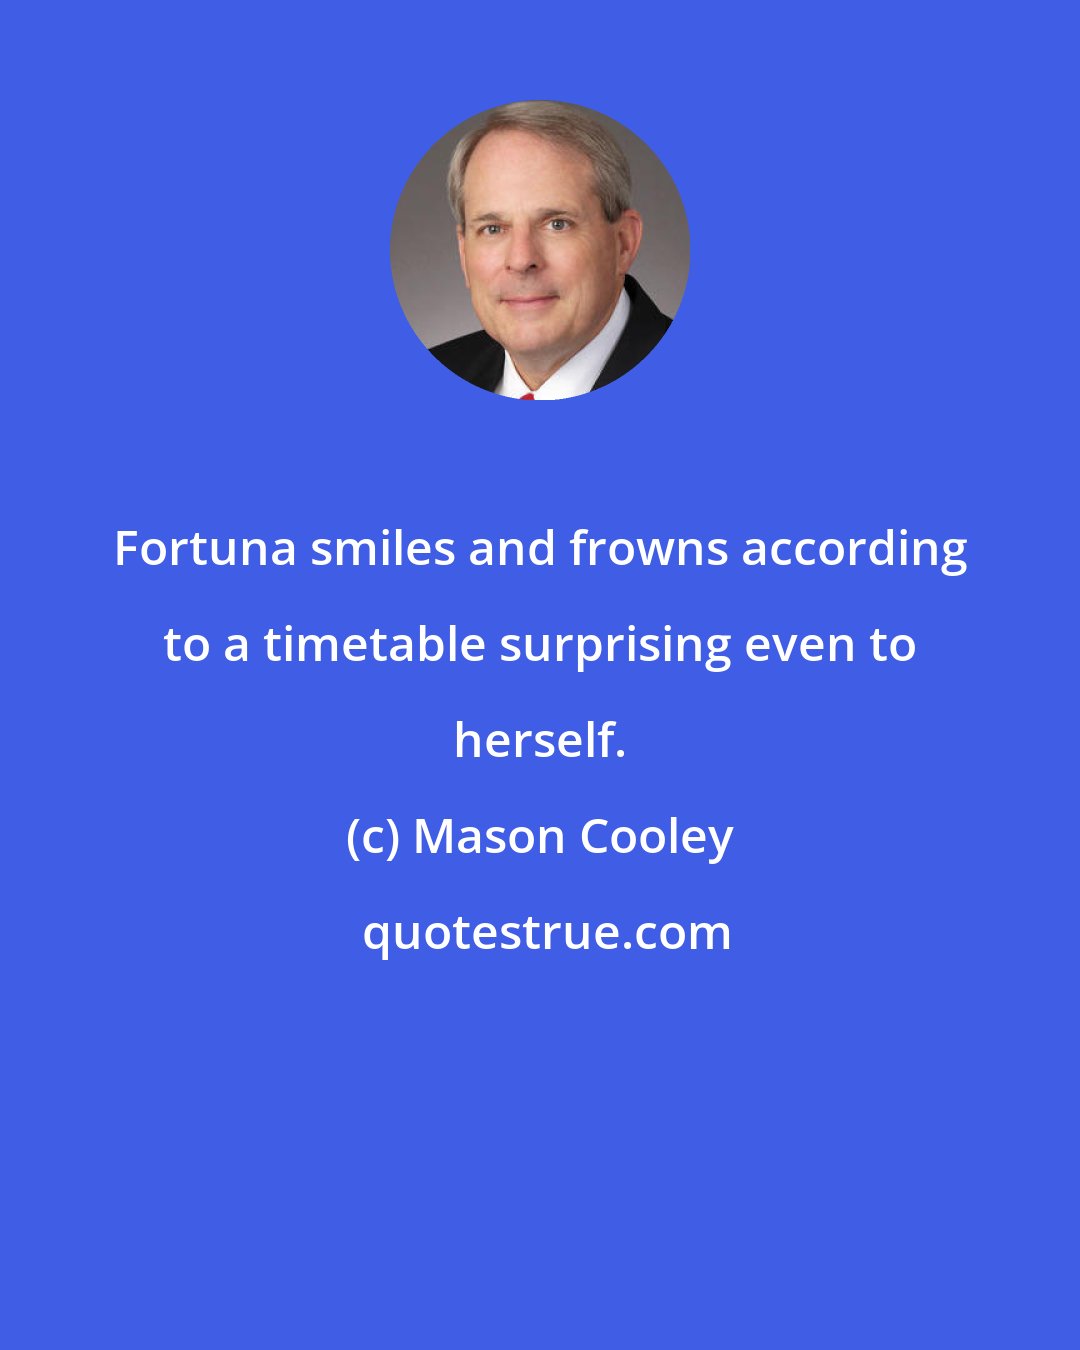 Mason Cooley: Fortuna smiles and frowns according to a timetable surprising even to herself.